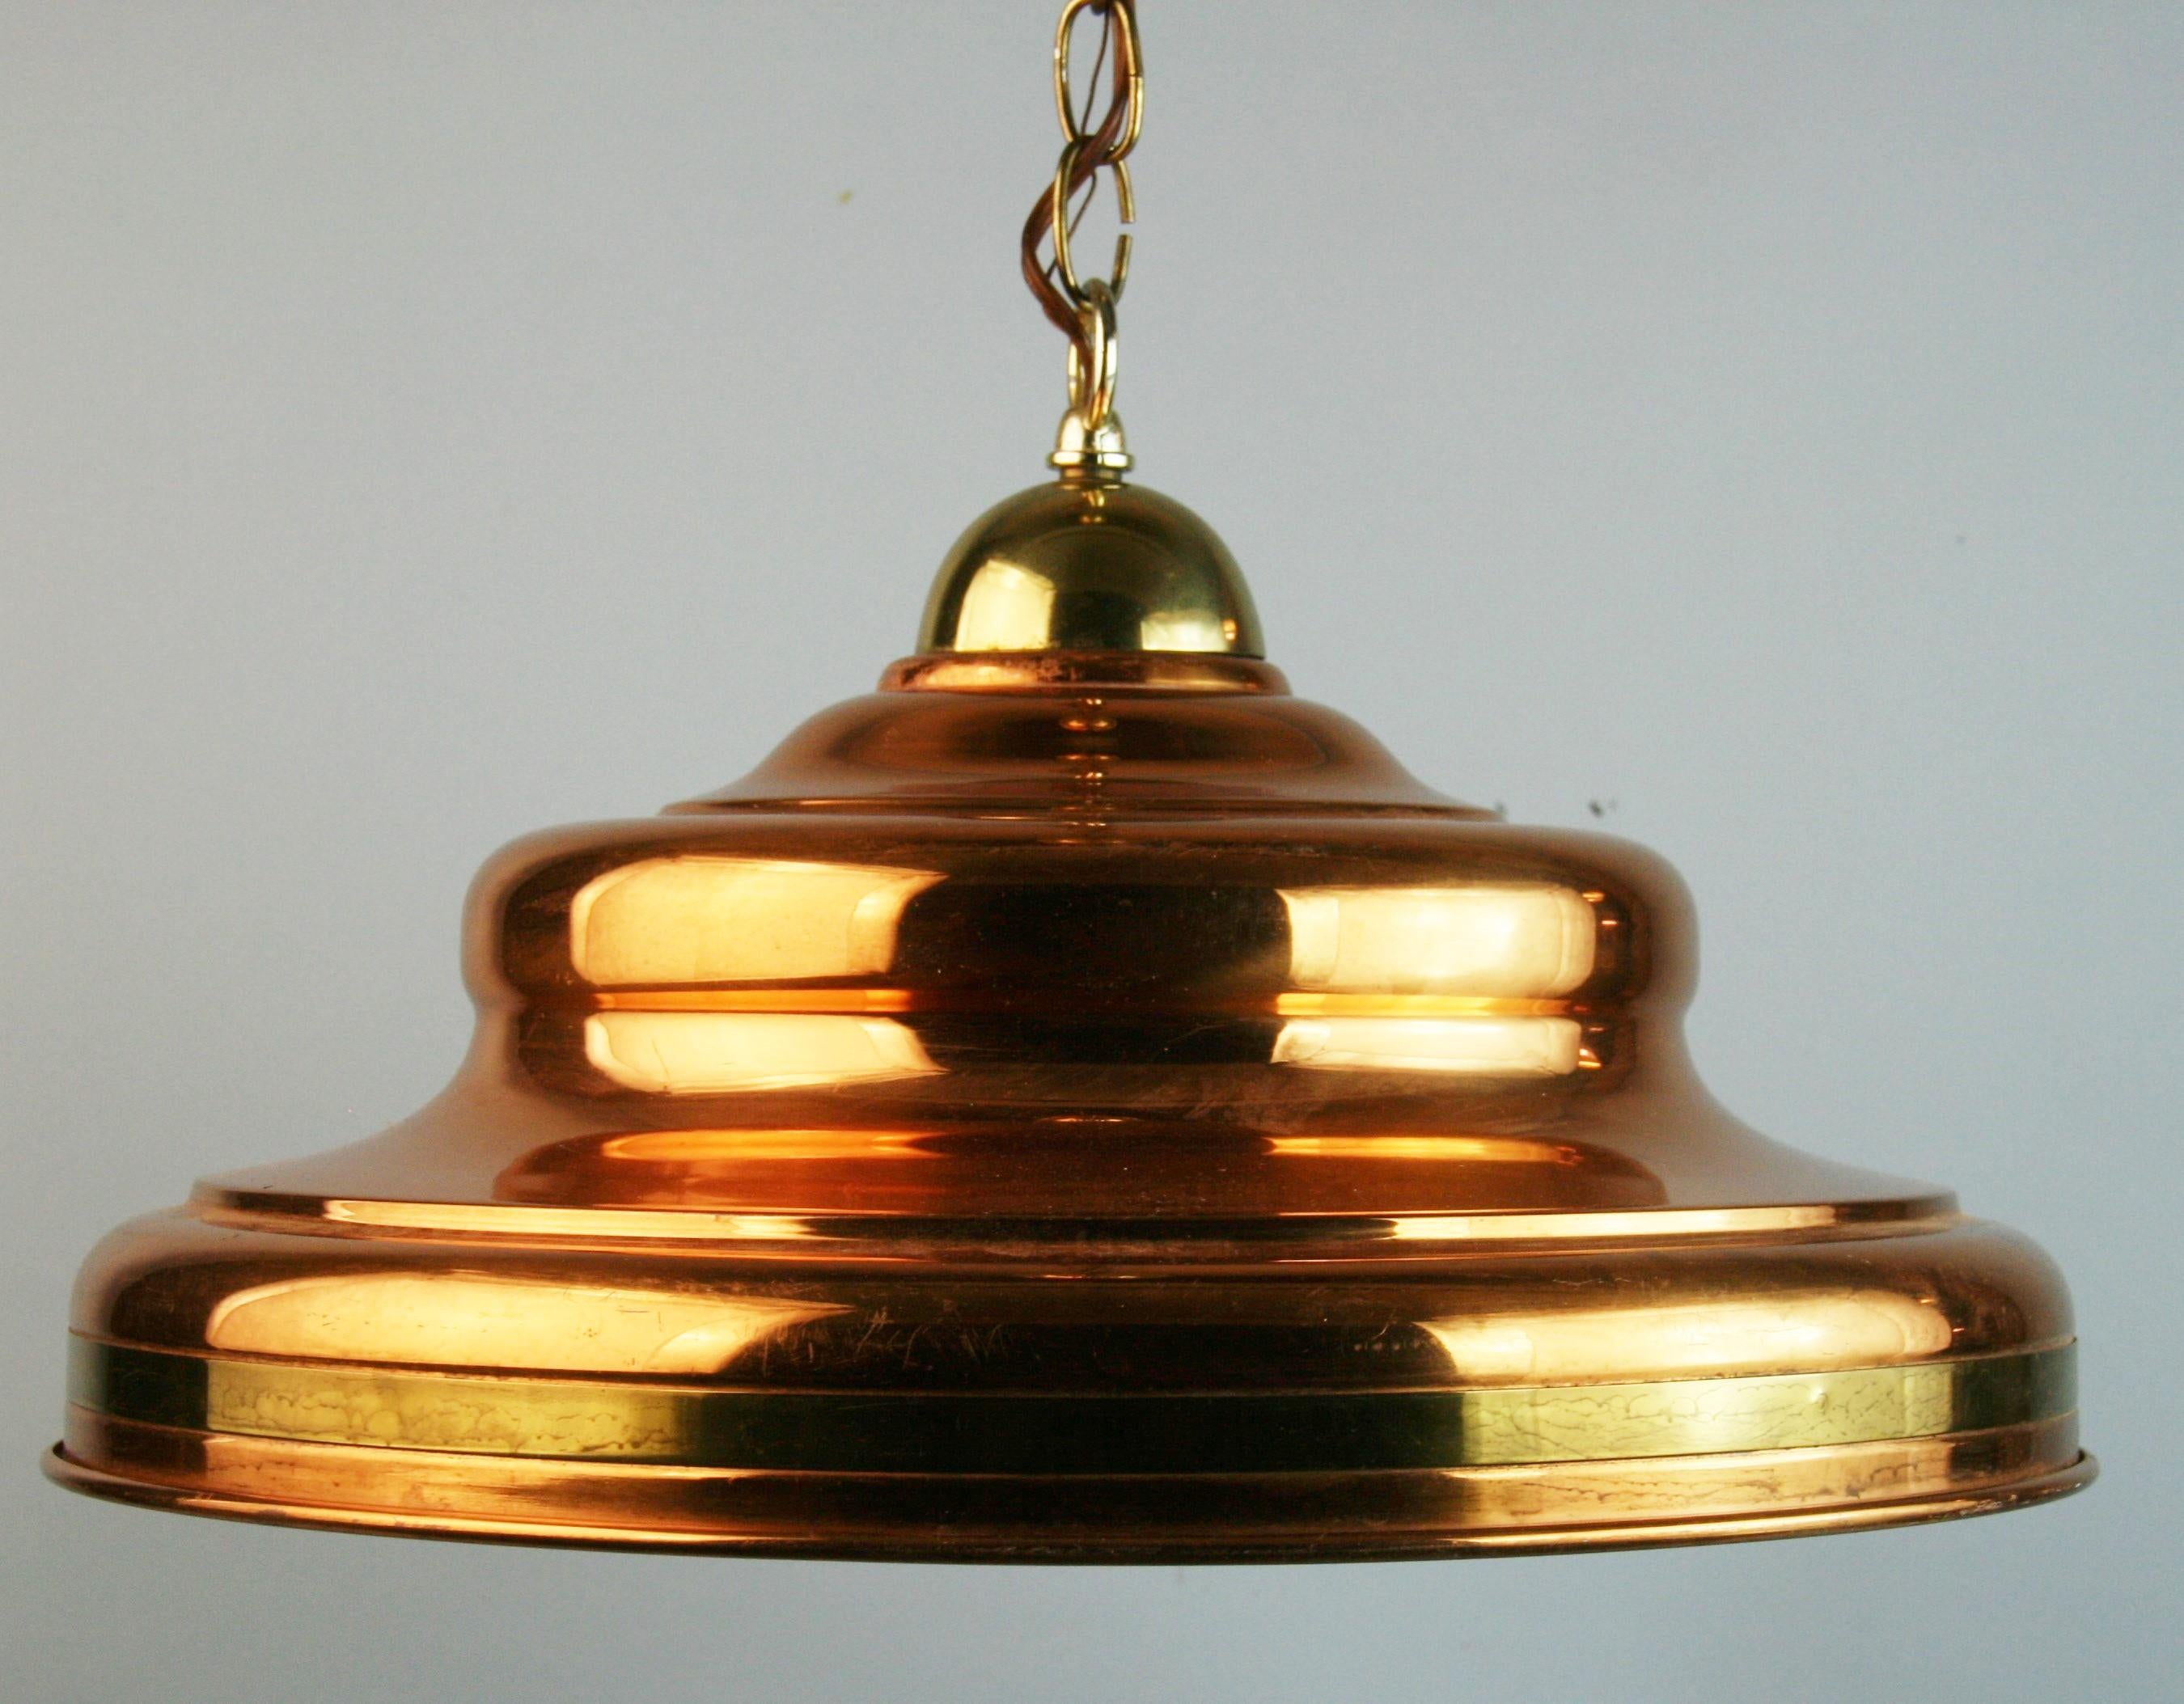 Danish copper and brass pendant with enamel interior
Takes one 100 watt bulb
Supplied with 3 feet chain and canopy.